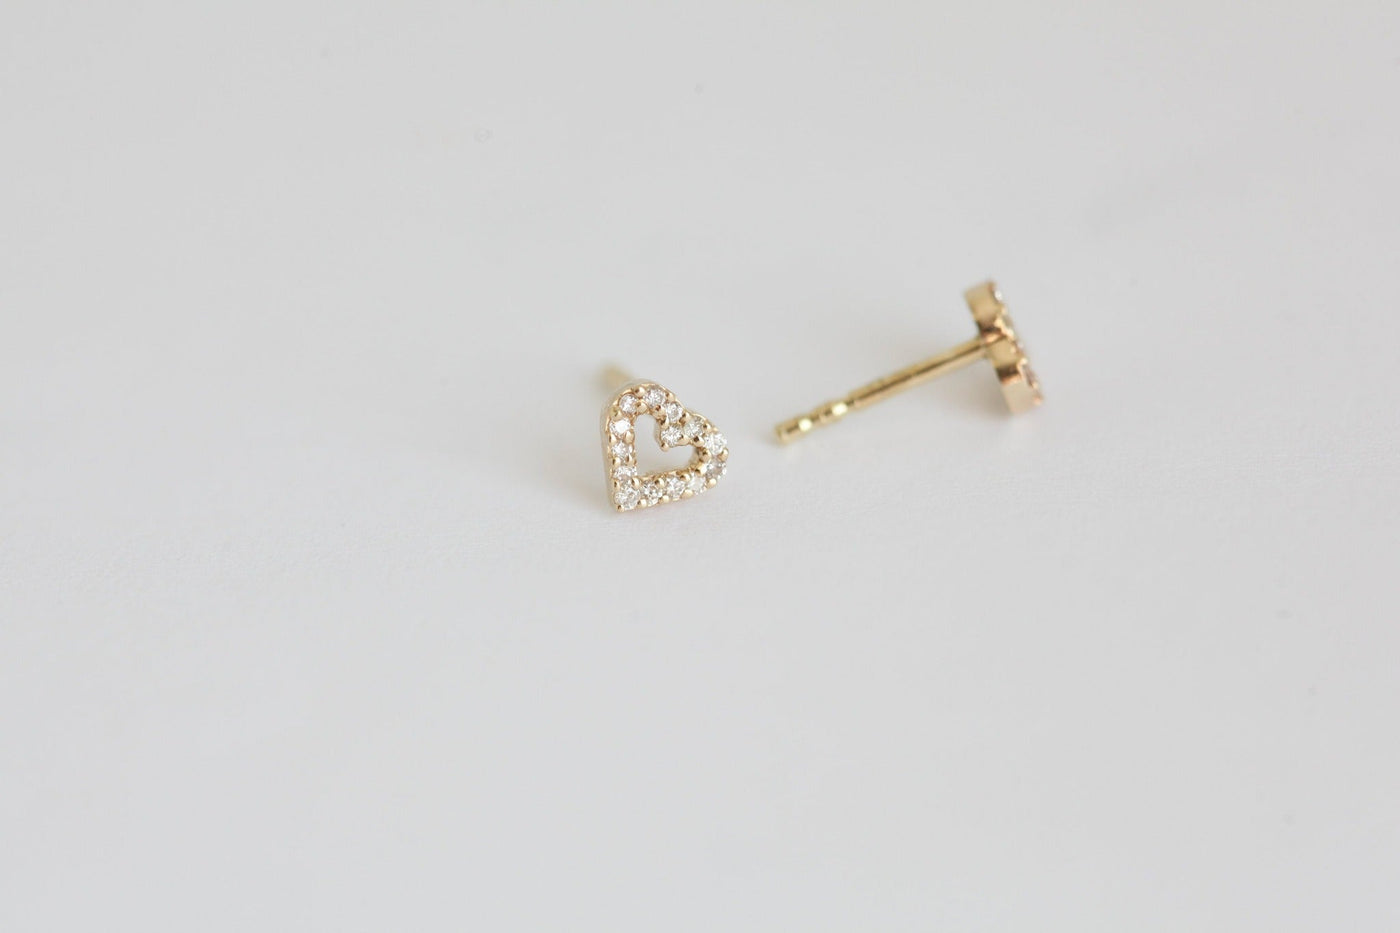 Heart-shaped gold stud earrings with round white diamonds